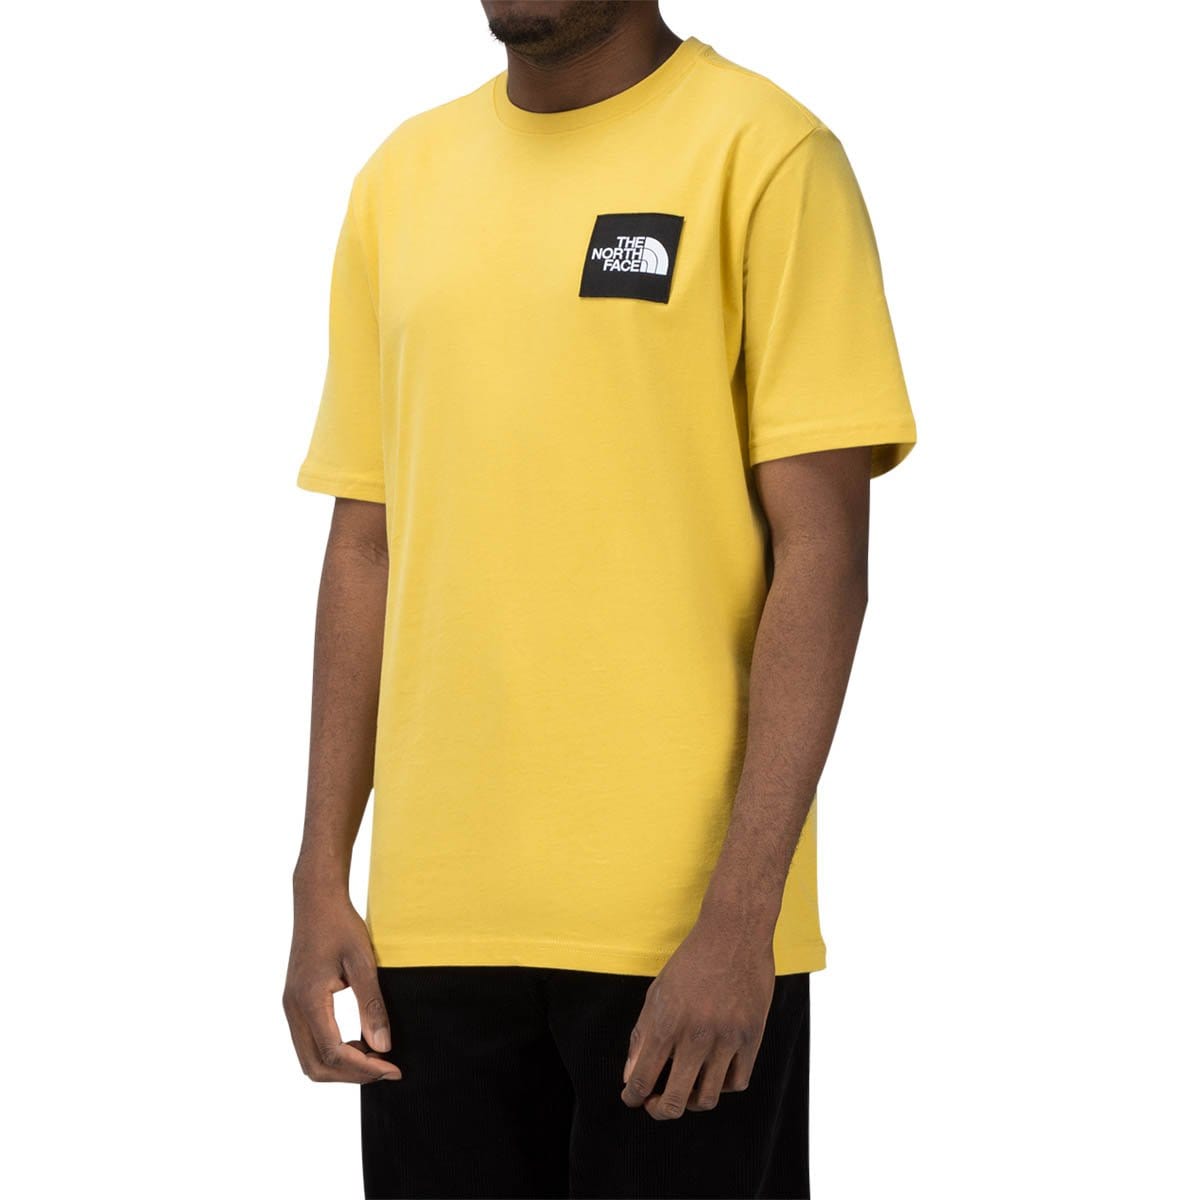 The North Face Black Series Masters of Stone Tee Bamboo Yellow